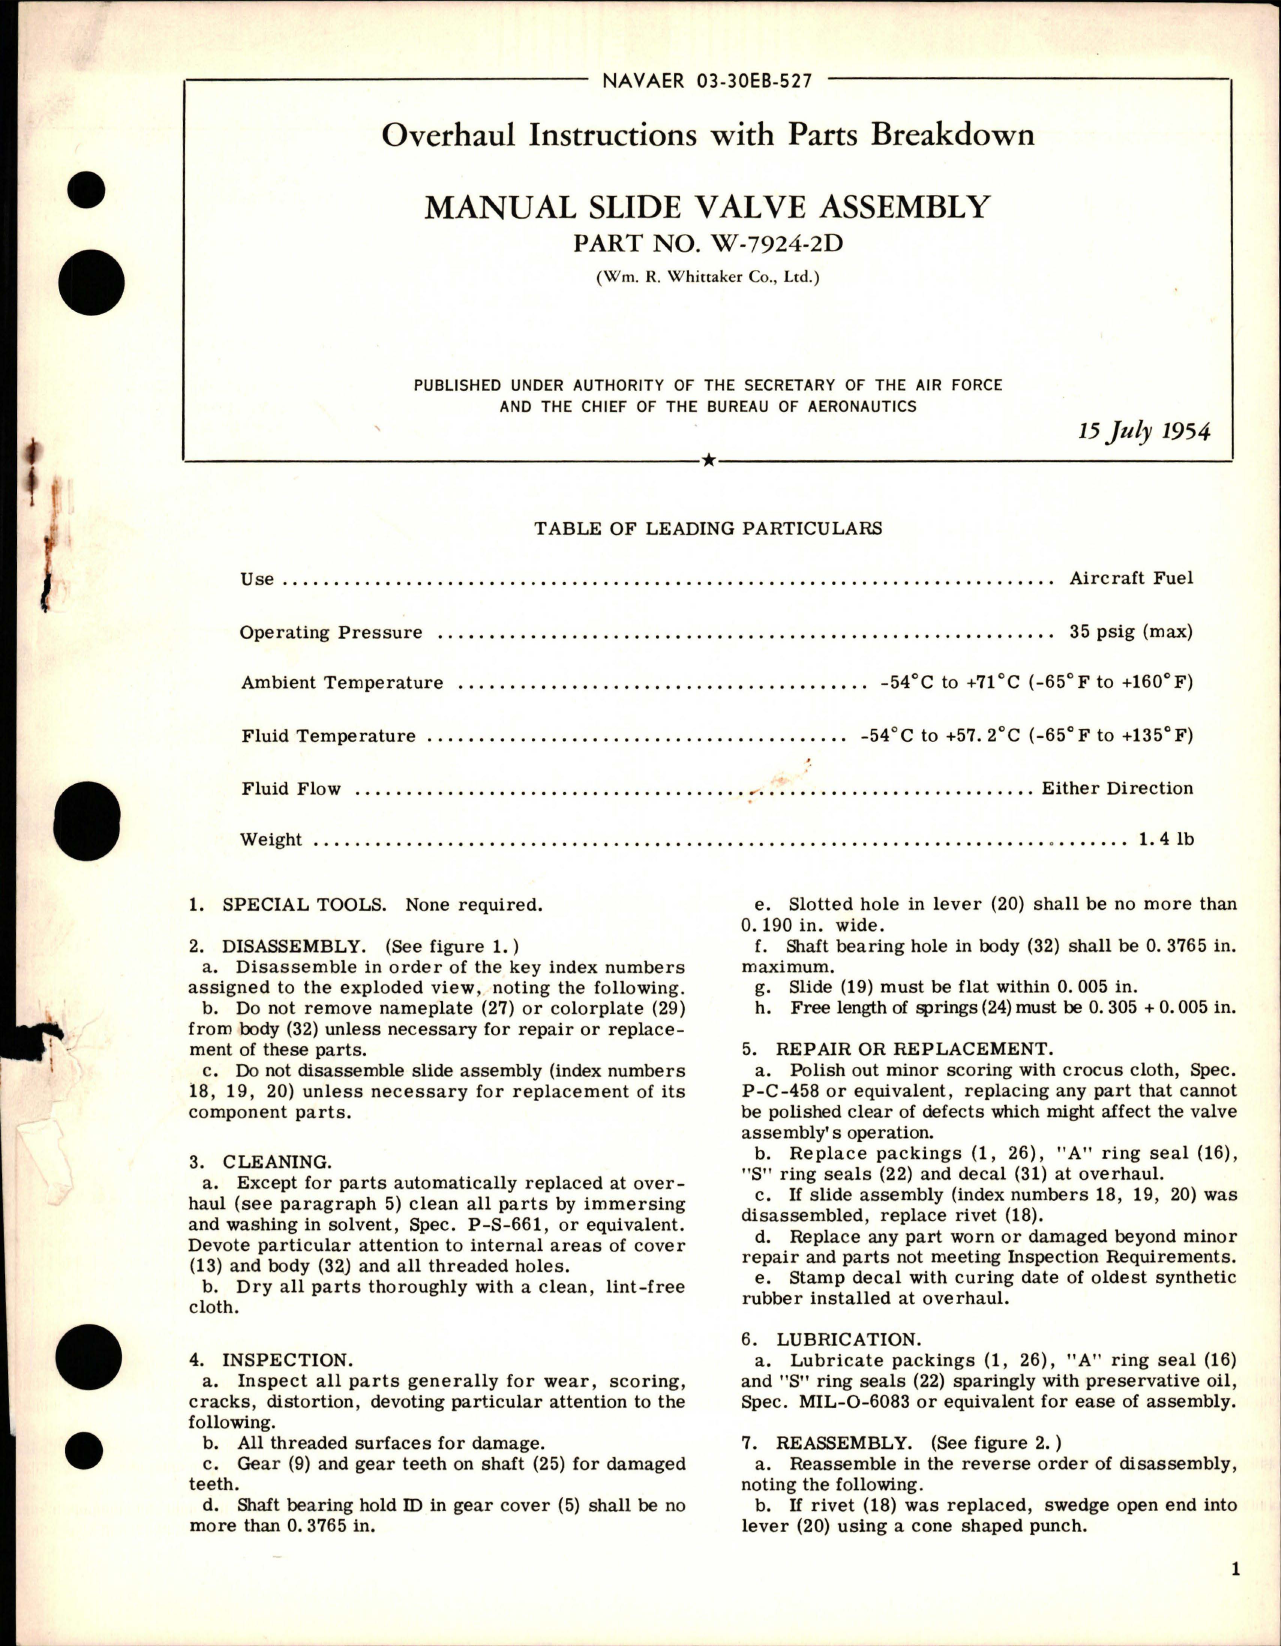 Sample page 1 from AirCorps Library document: Overhaul Instructions with Parts Breakdown for Manual Slide Valve Assembly - Part W-7924-D